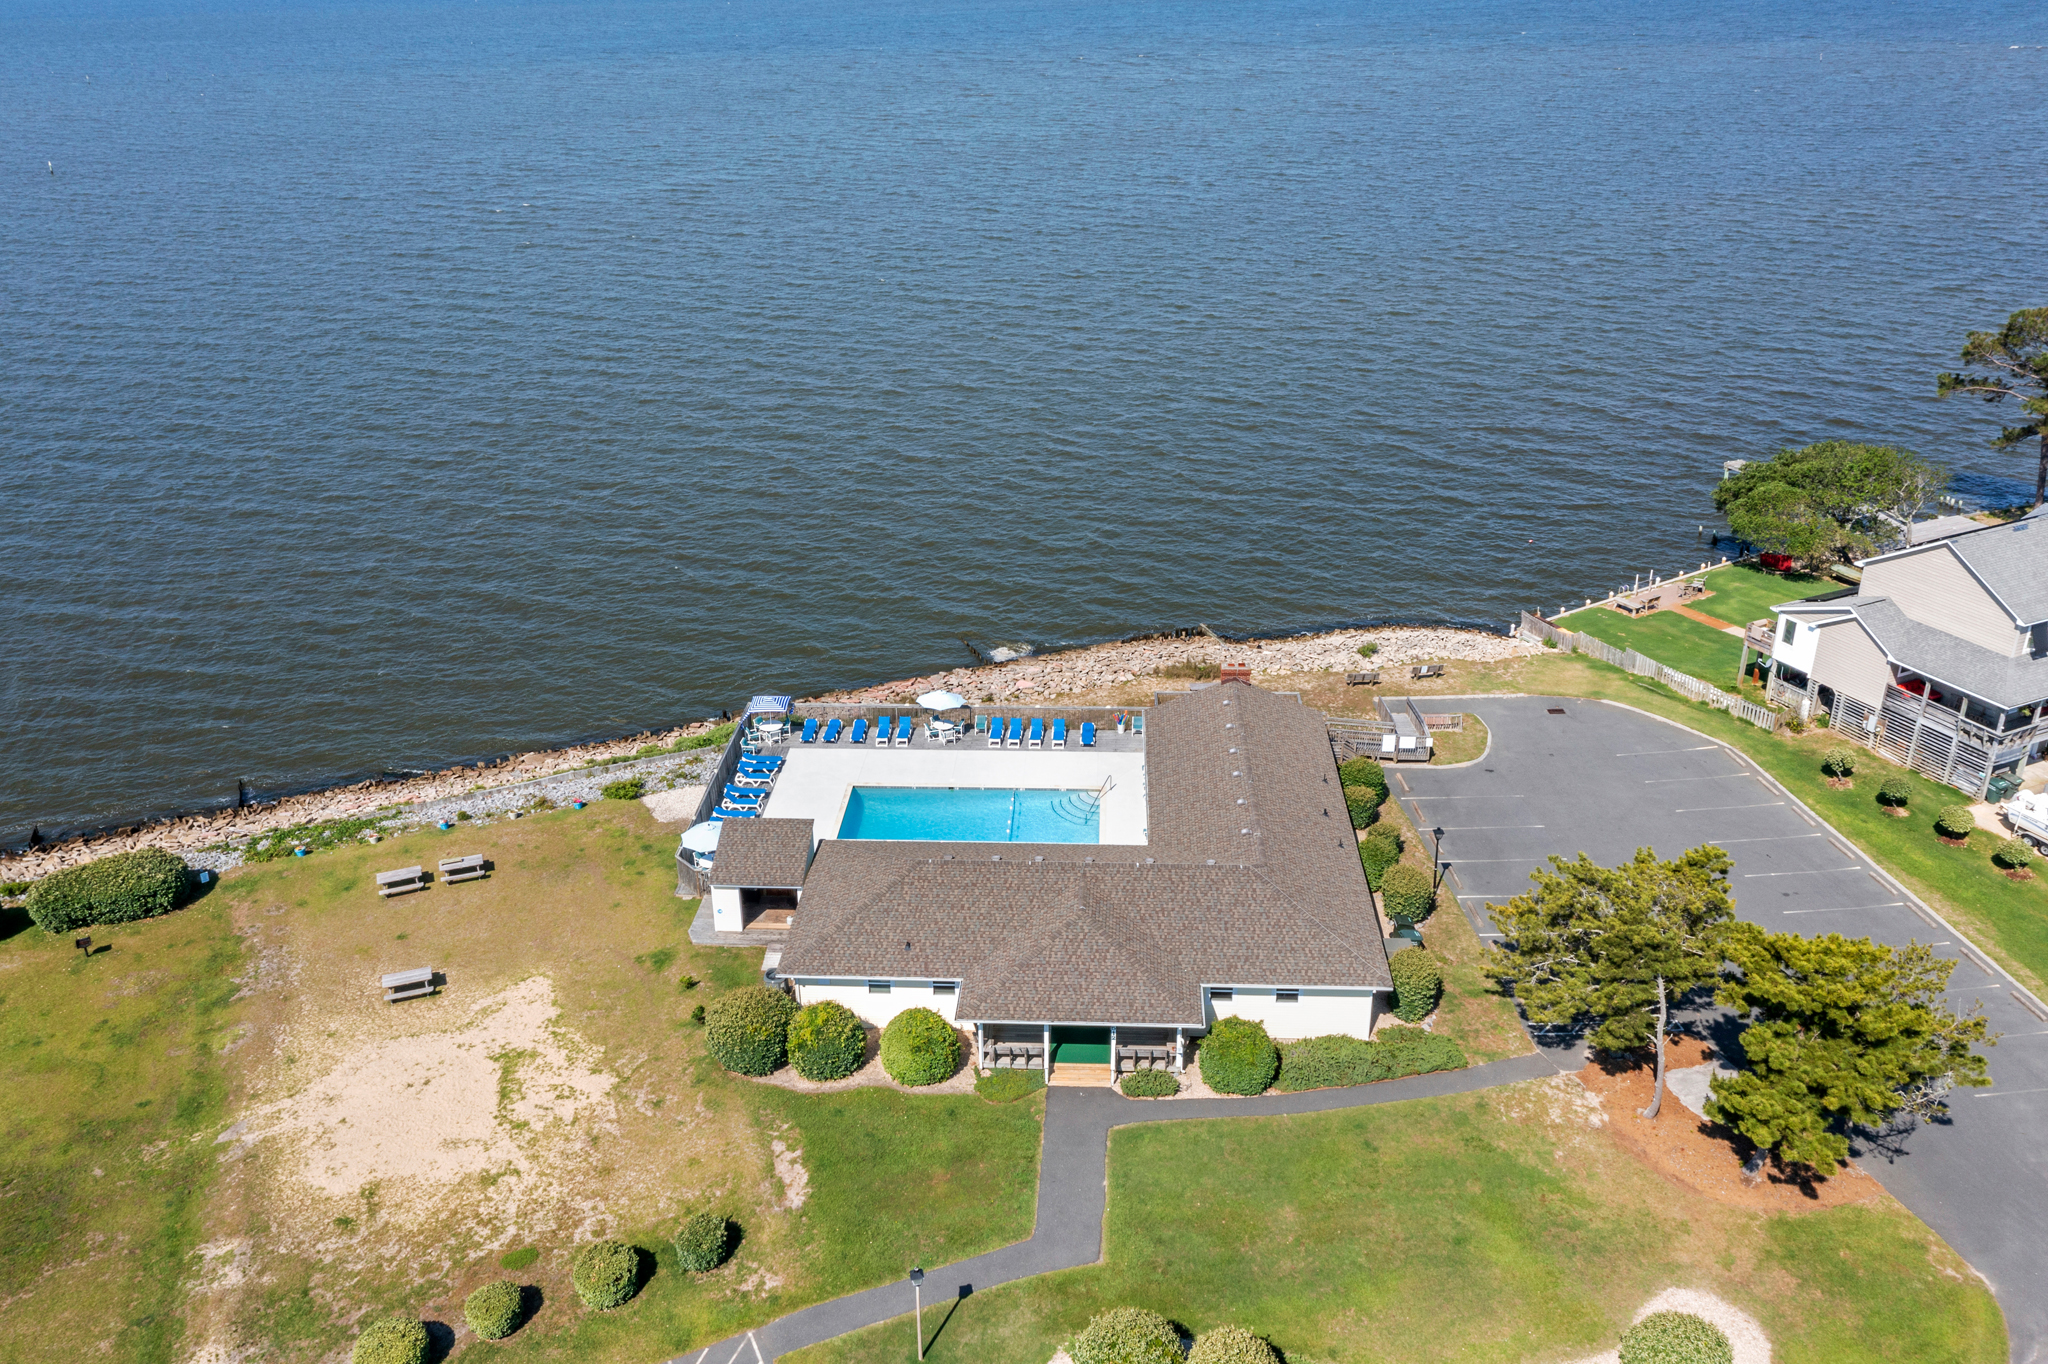 Old Nags Head Cove | Community Pool (Optional Access for Nominal Fee)